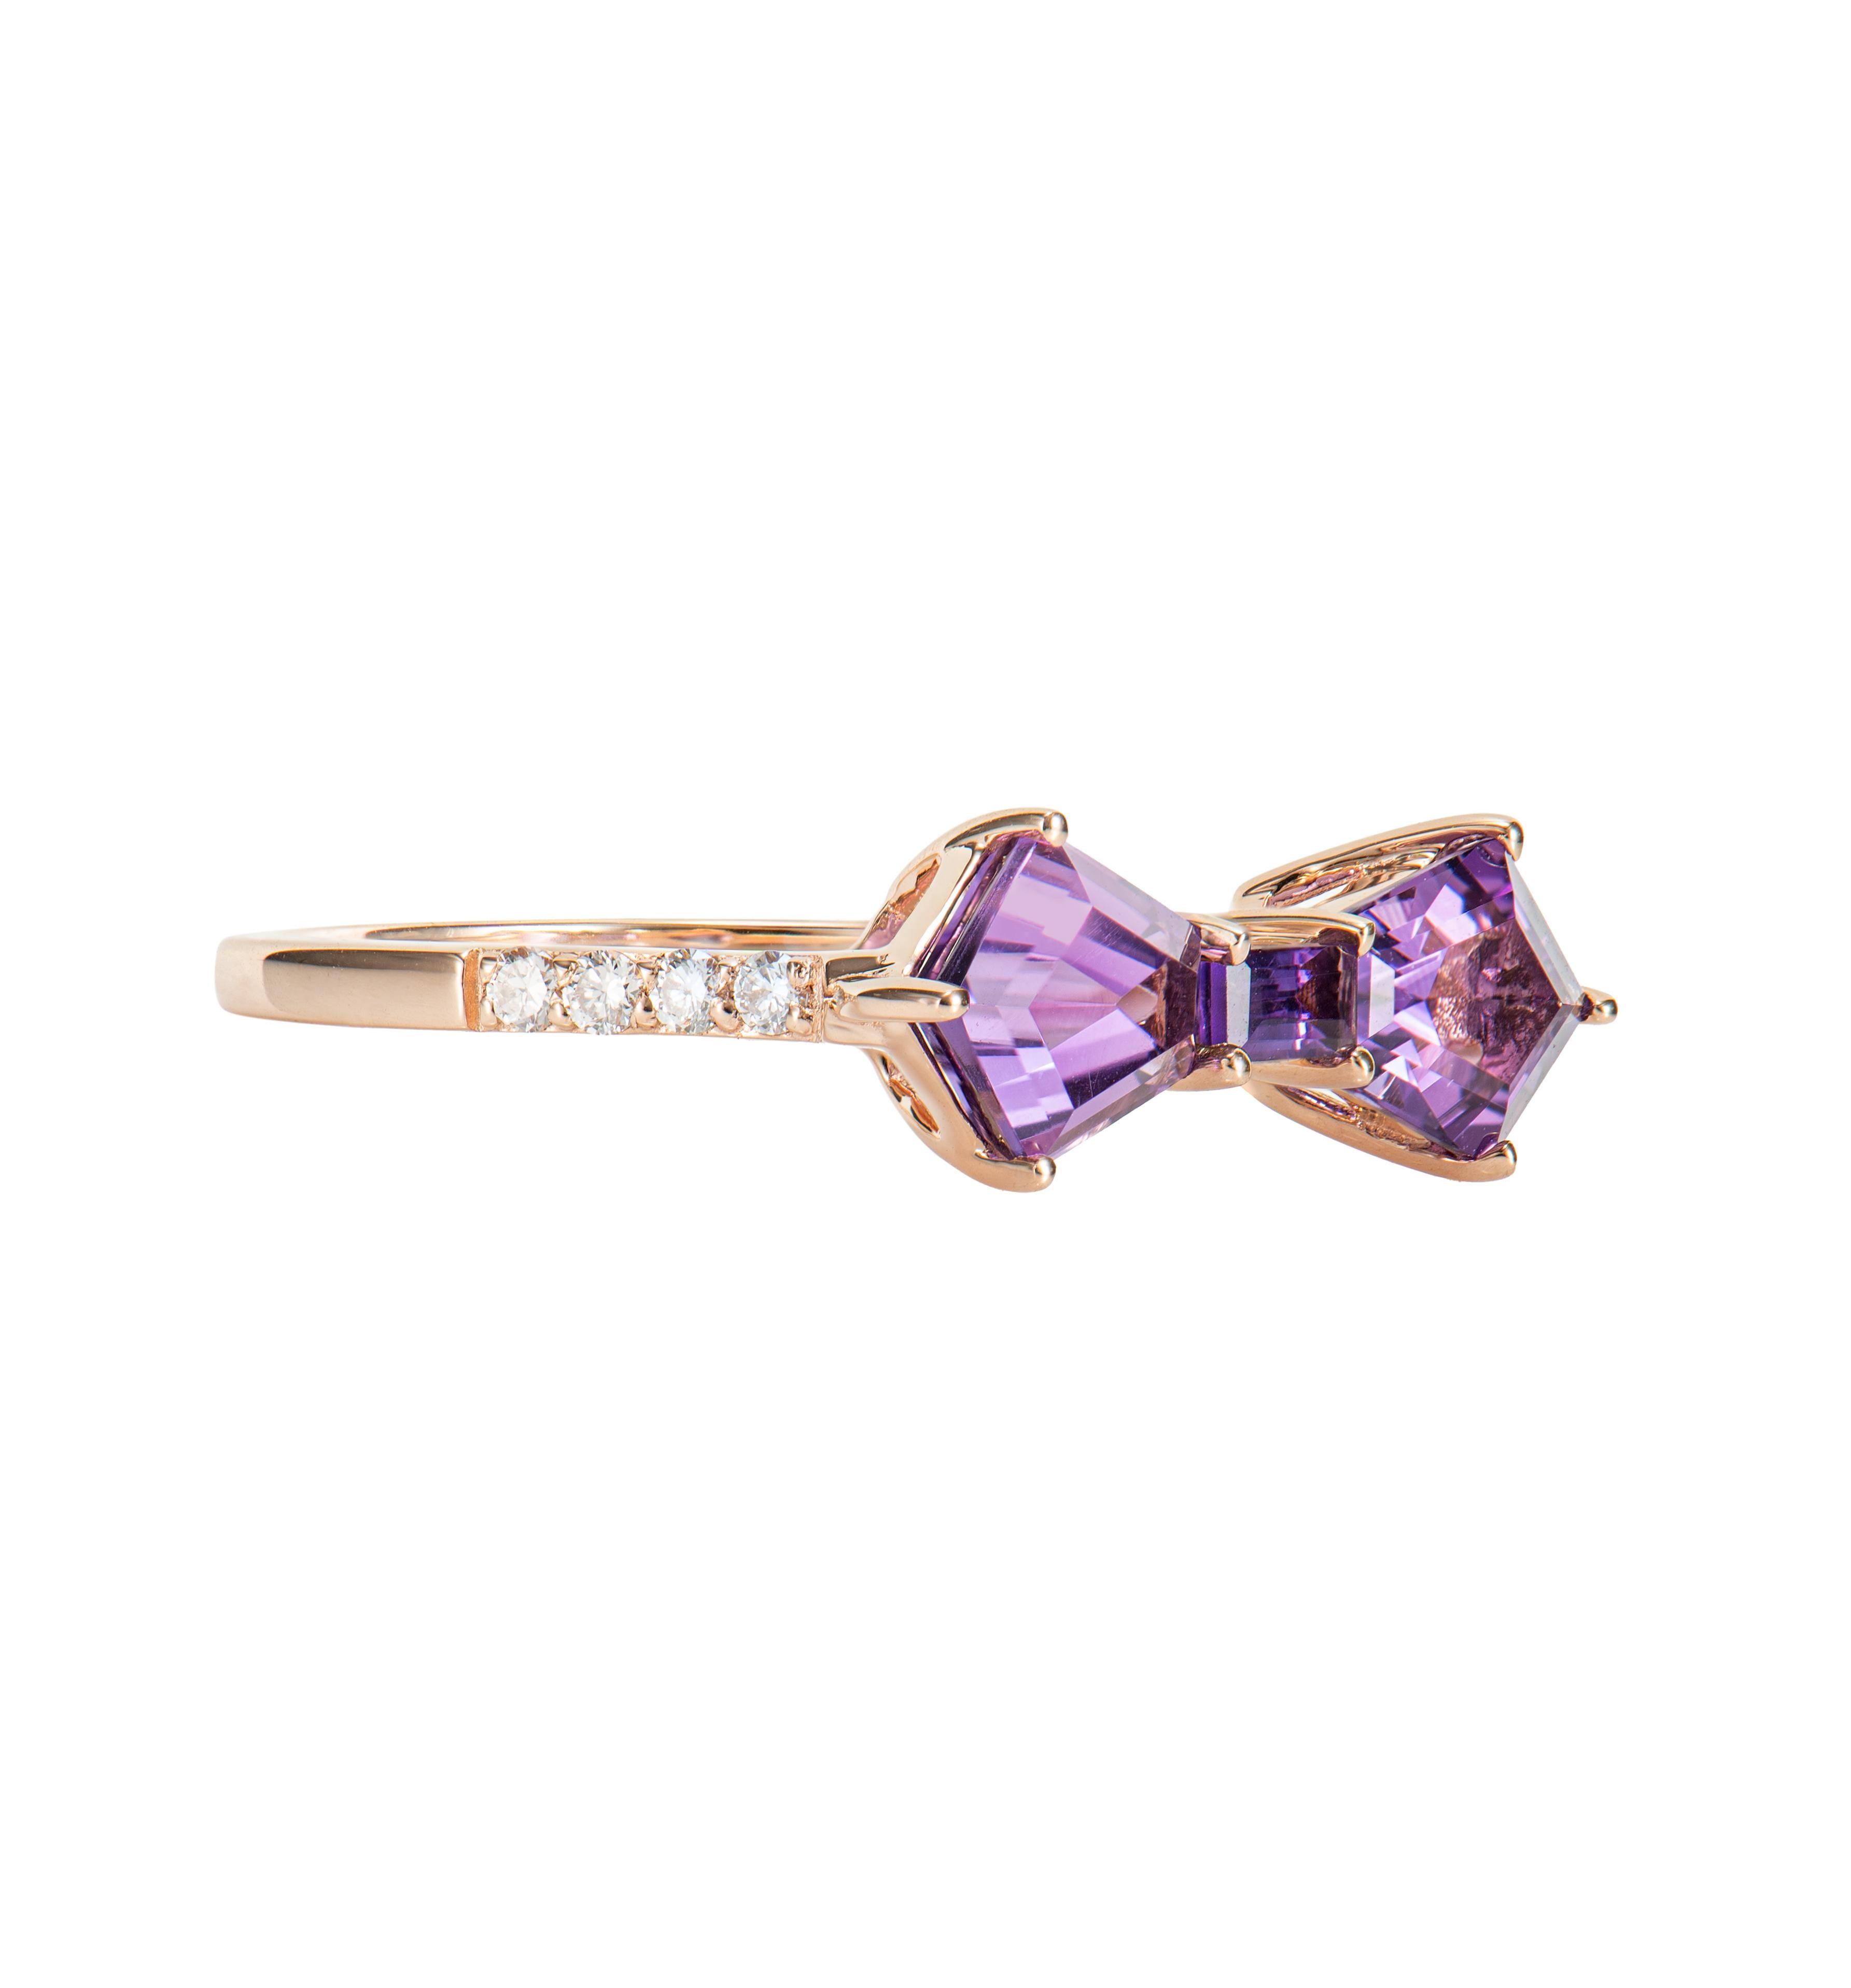 It is Fancy Amethyst Ring in NIB shape with purple hue. This rose gold Ring have a timeless, elegant appearance and can be worn on different occasions.

Amethyst Ring in 14Karat Rose Gold with White Diamond.

Amethyst: 1.70 carat, 8X6mm size,